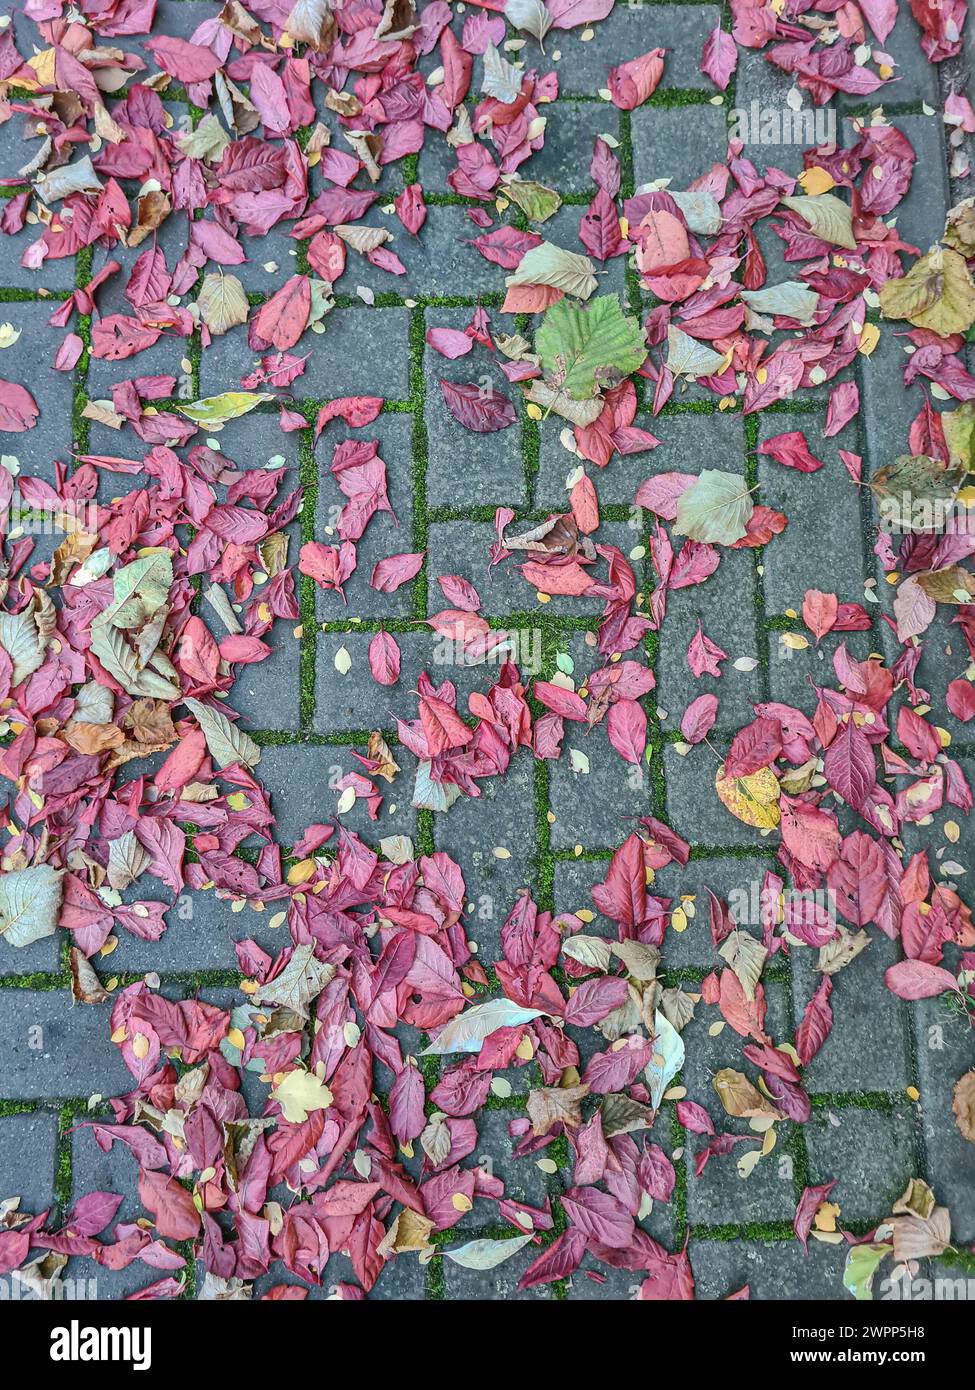 Various colorful autumn leaves from the Japanese plum tree and others lie on the mossy paving stones after a rain shower Stock Photo